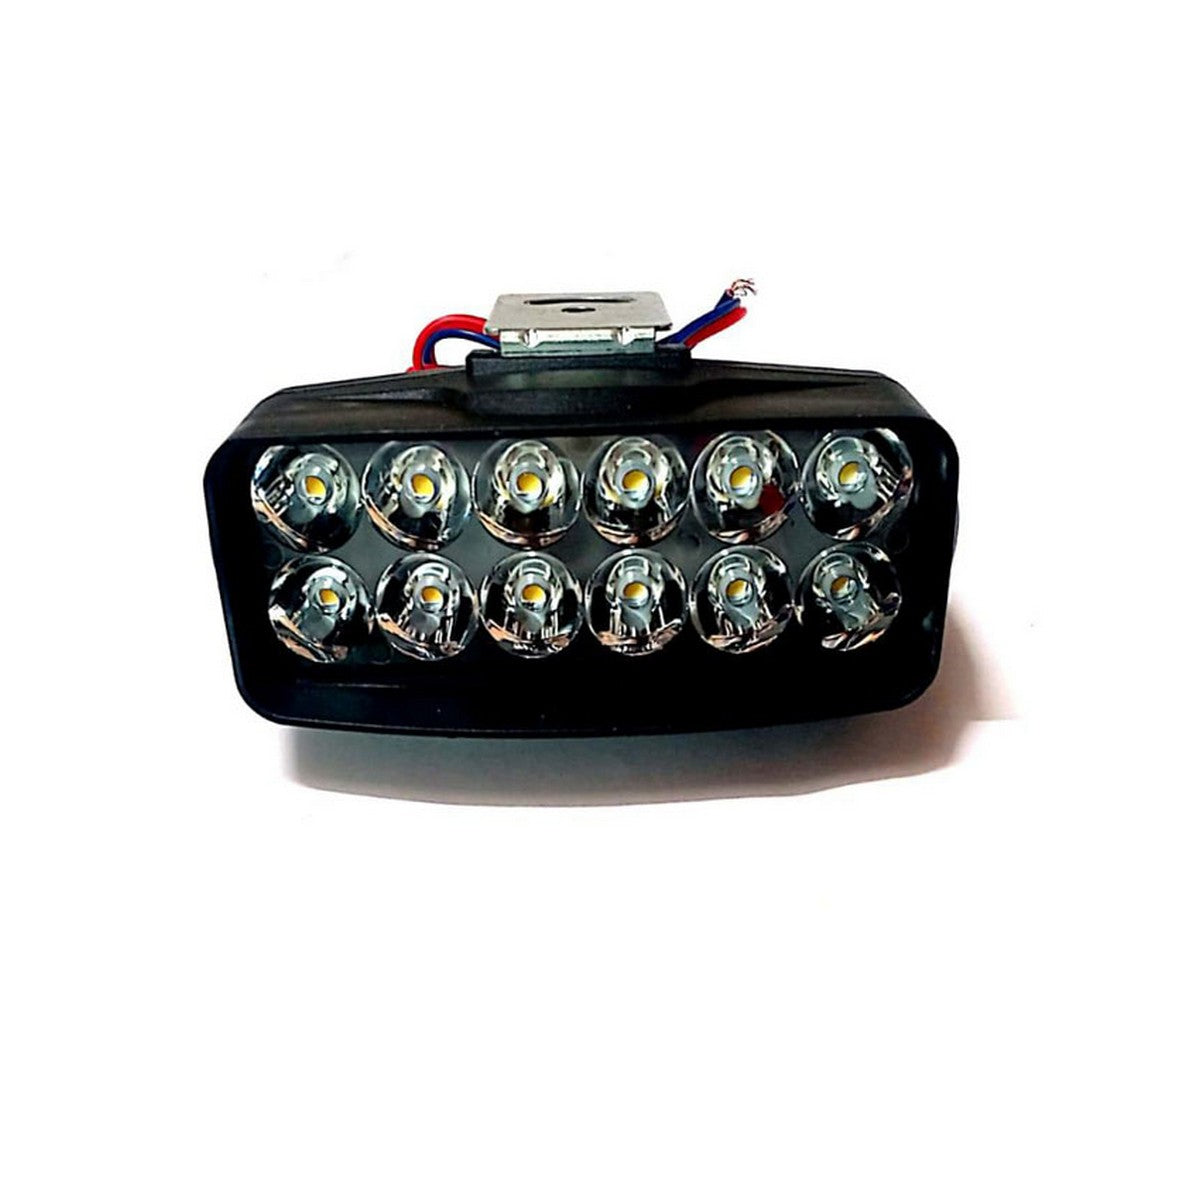 12 LED Light for Motorcycle